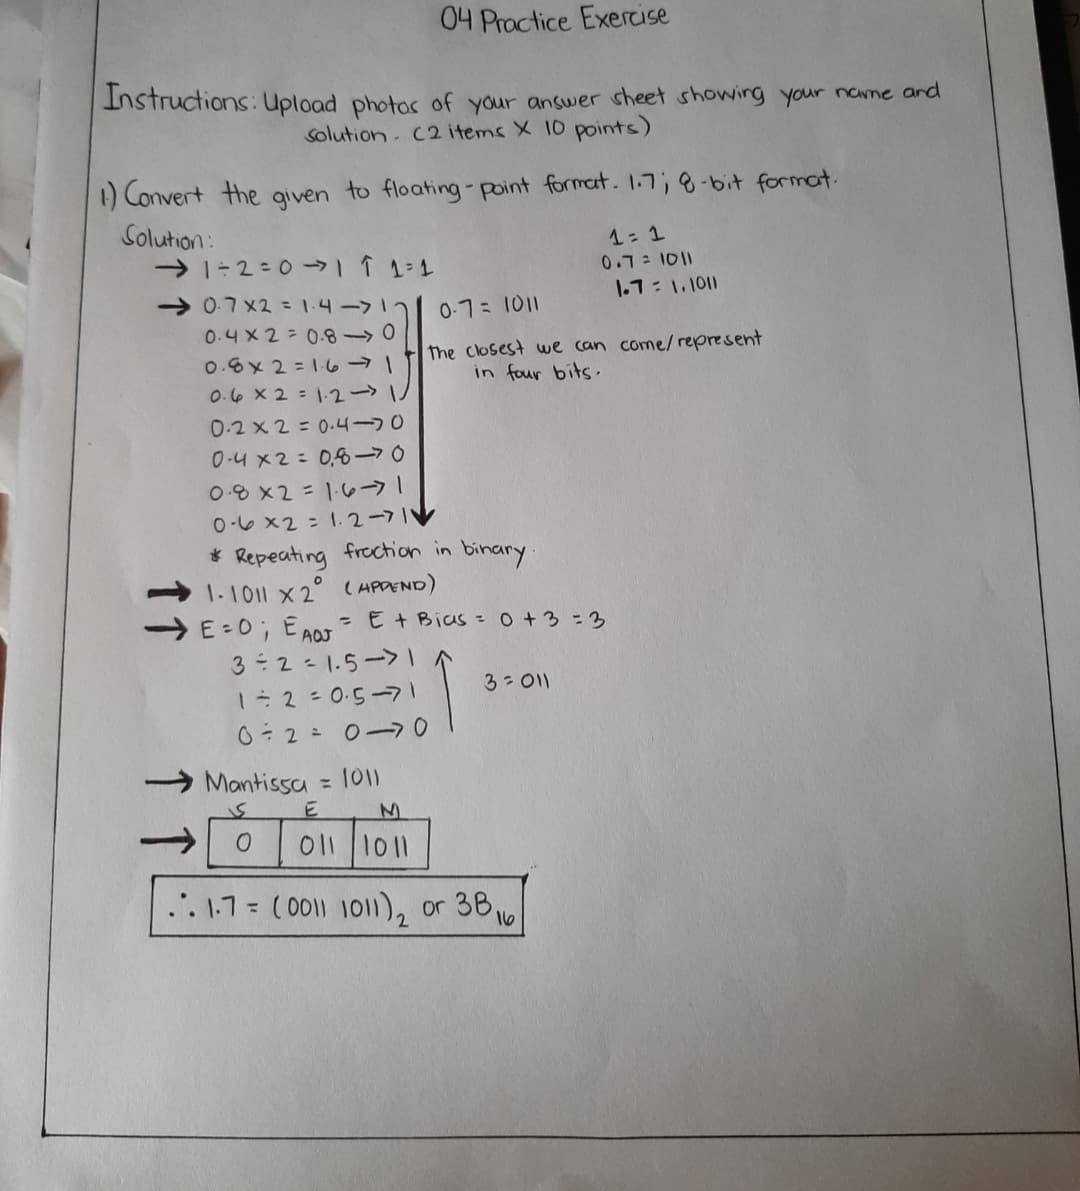 04 Practice Exercise
Instructions: Upload photoc of your answer sheet showing youur name and
Solution. C2 items X 10 points)
1) Convert the given to floating- point format. 1.7; 8-bit format.
Solution:
1=1
0.7:1011
1.1:1.1011
→ 0.7×2 =1-4-71つ
0.4X2= 0.8-
0-7 1011
The closest we can come/ represent
in four bits.
0.6x2=16
O.6 x 2 = 1.2 1
0.2×2: 0.4ー70
0-4 x2= 0,6-70
0- ×2 - 1-い→!
O-6 x2 = 1.2-711
* Repeating froction in binary.
1-1011 x 2° ( APDEND)
E:0; EA0T =E+ Bias = 0 + 3=3
3 2 - 1.5->|
3- 11
1 2 0.5-71
0- 2 0- 0
Mantissa = 101)
%3D
E
->
0l1 1011
.. 1.7= (0011 1011), or 38
%3D
